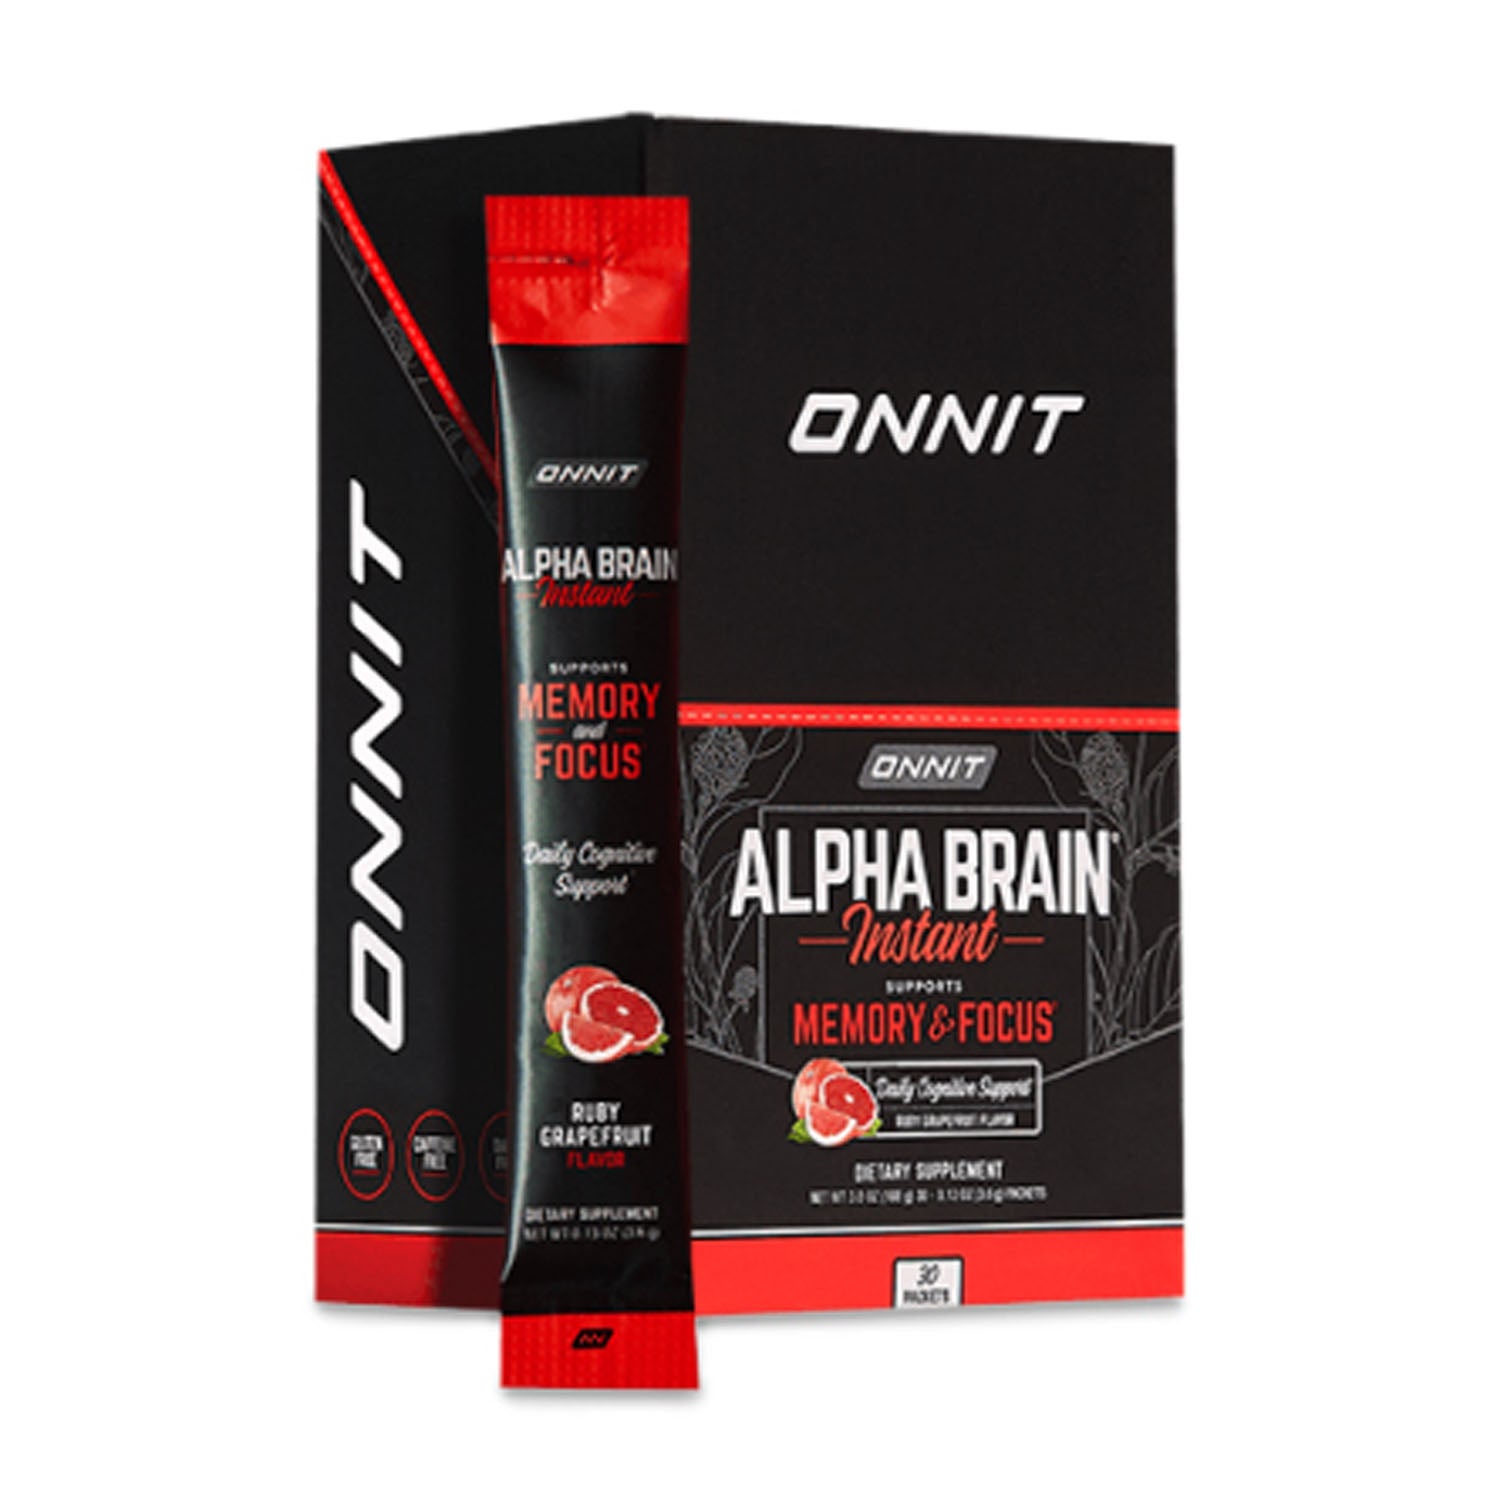 Onnit on Instagram: Have you experienced the Alpha BRAIN Pre